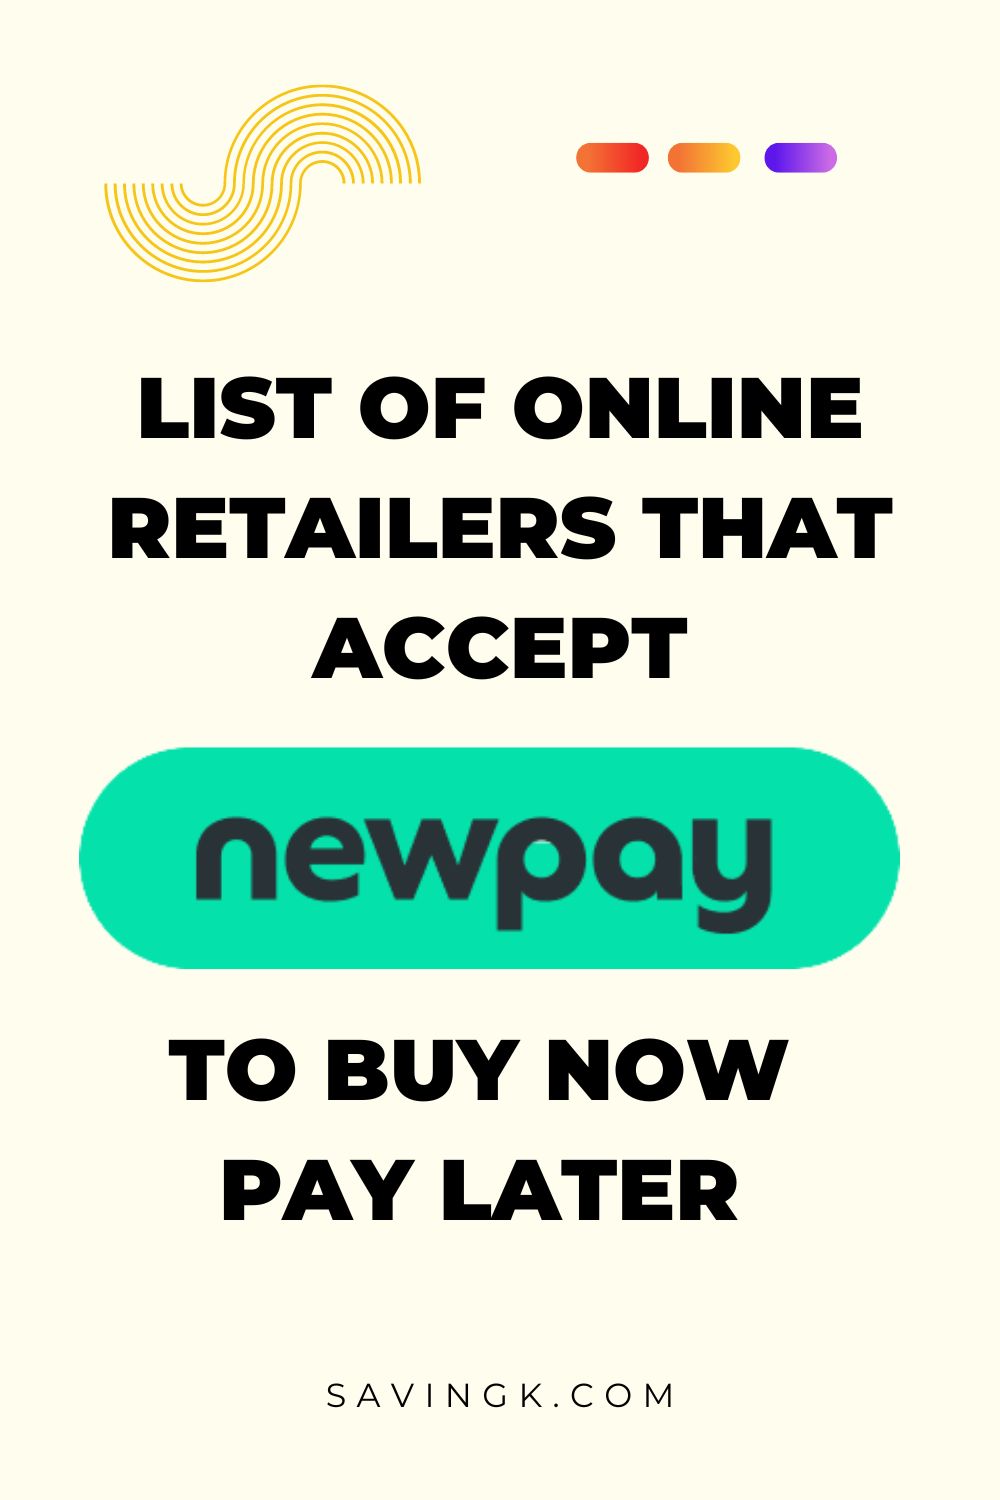 List of online retailers that accept Newpay to buy now pay later